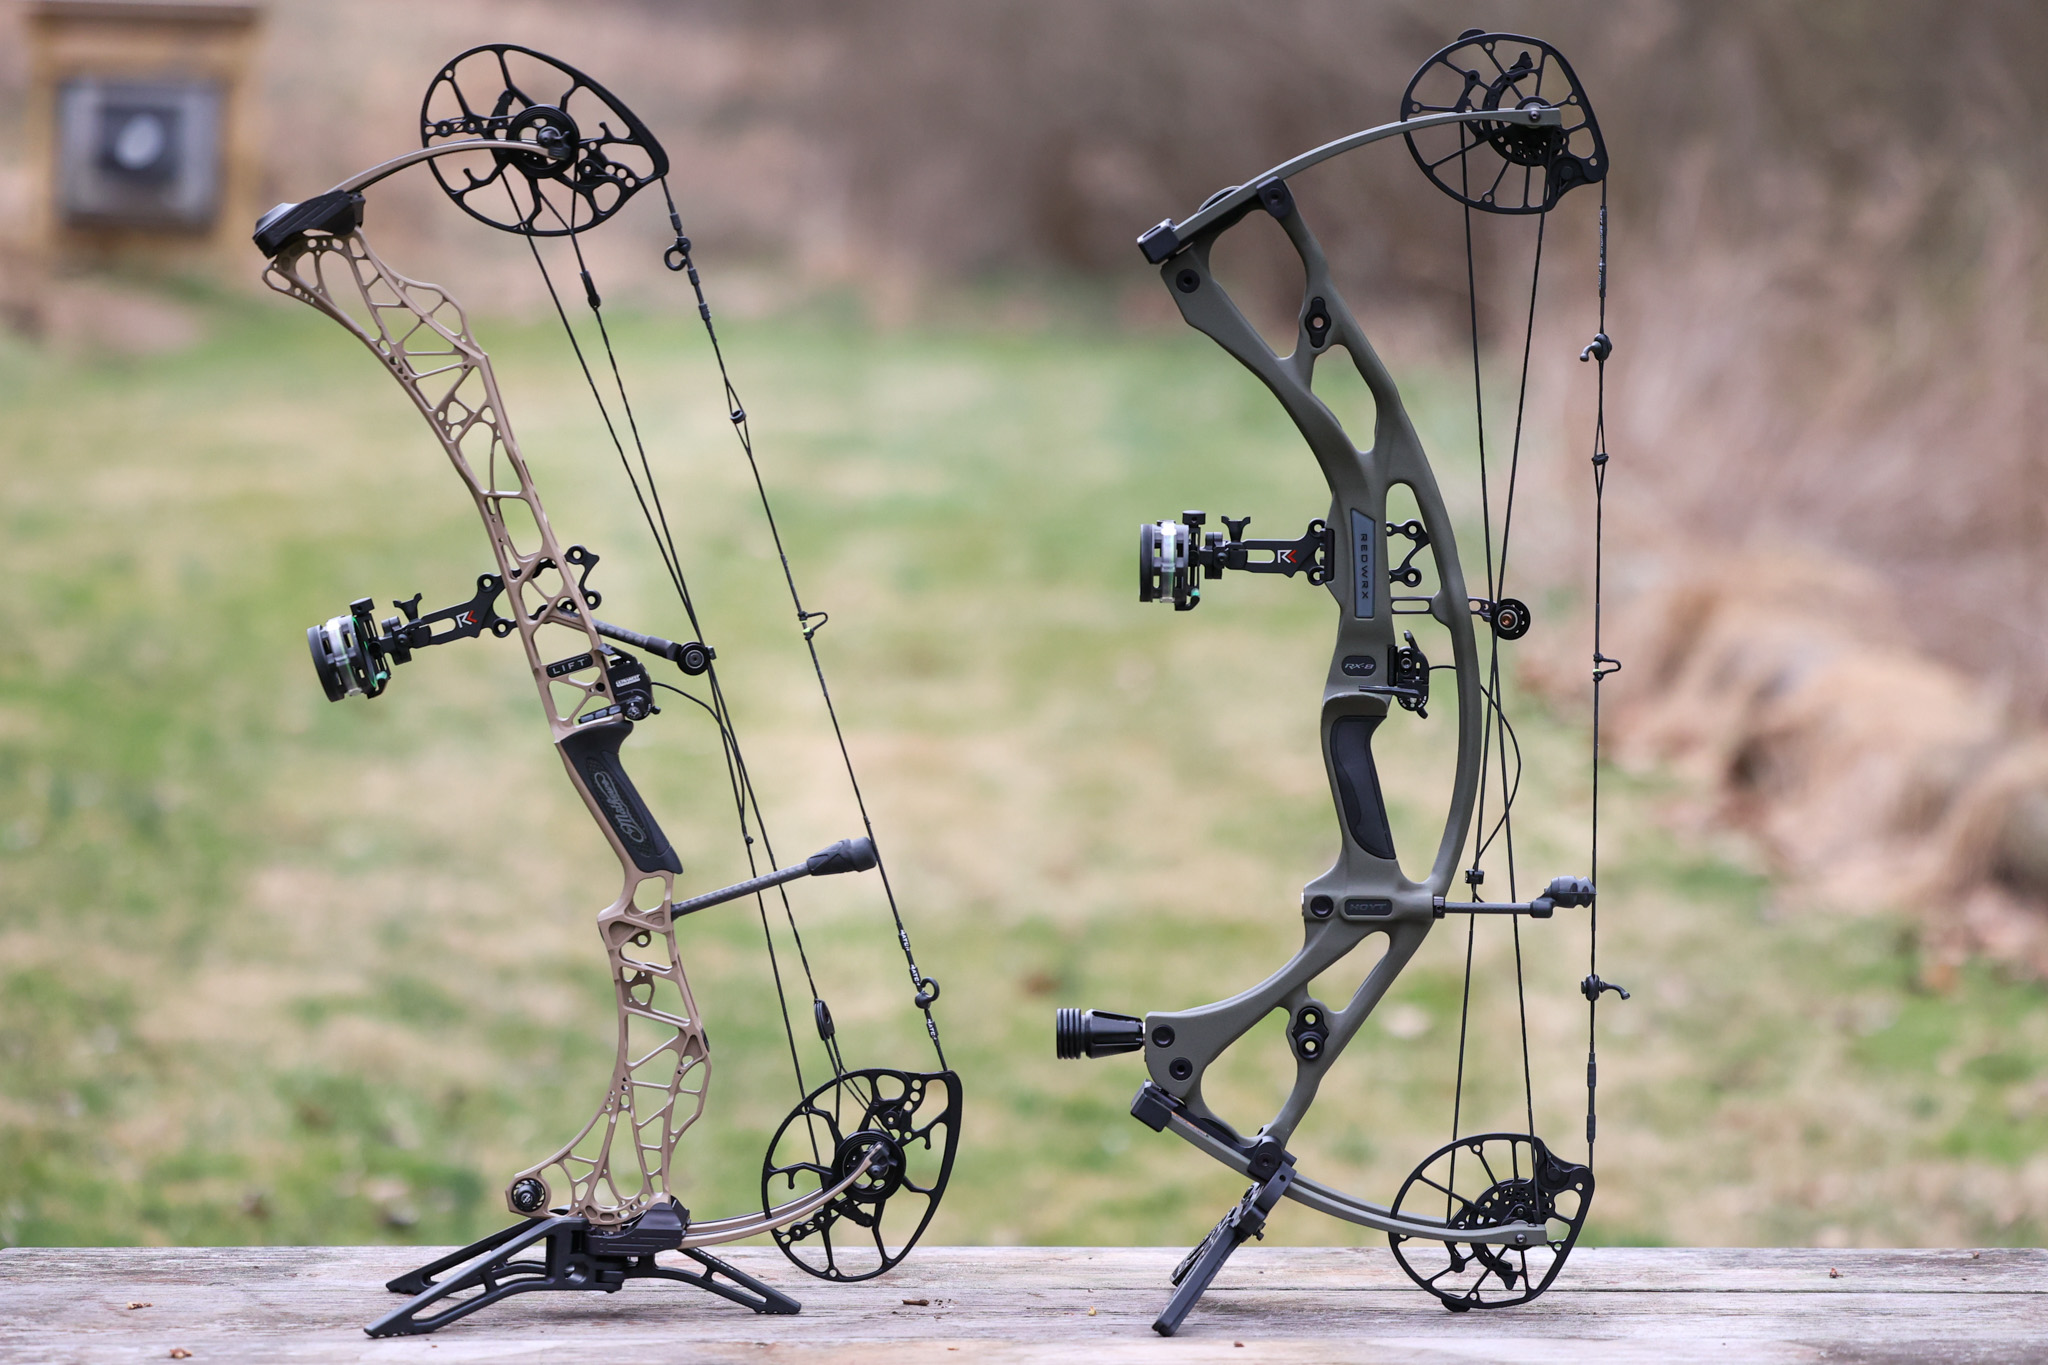 Mathews (left) and Hoyt (bows) have distinct risers and cams.